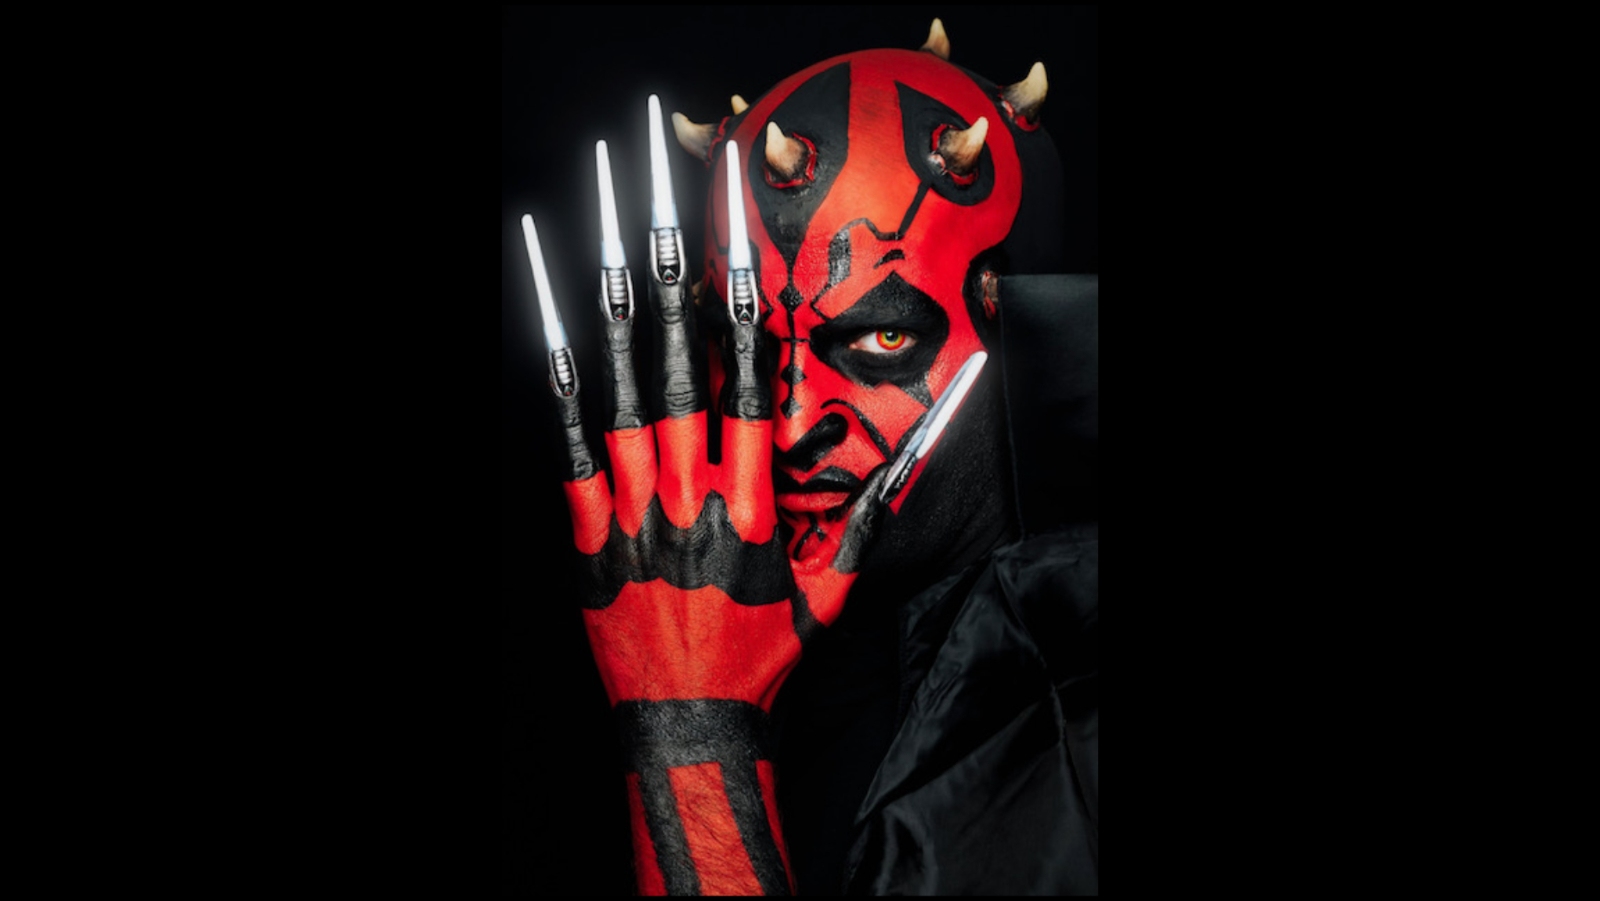 The Darth Maul look from Star Wars.